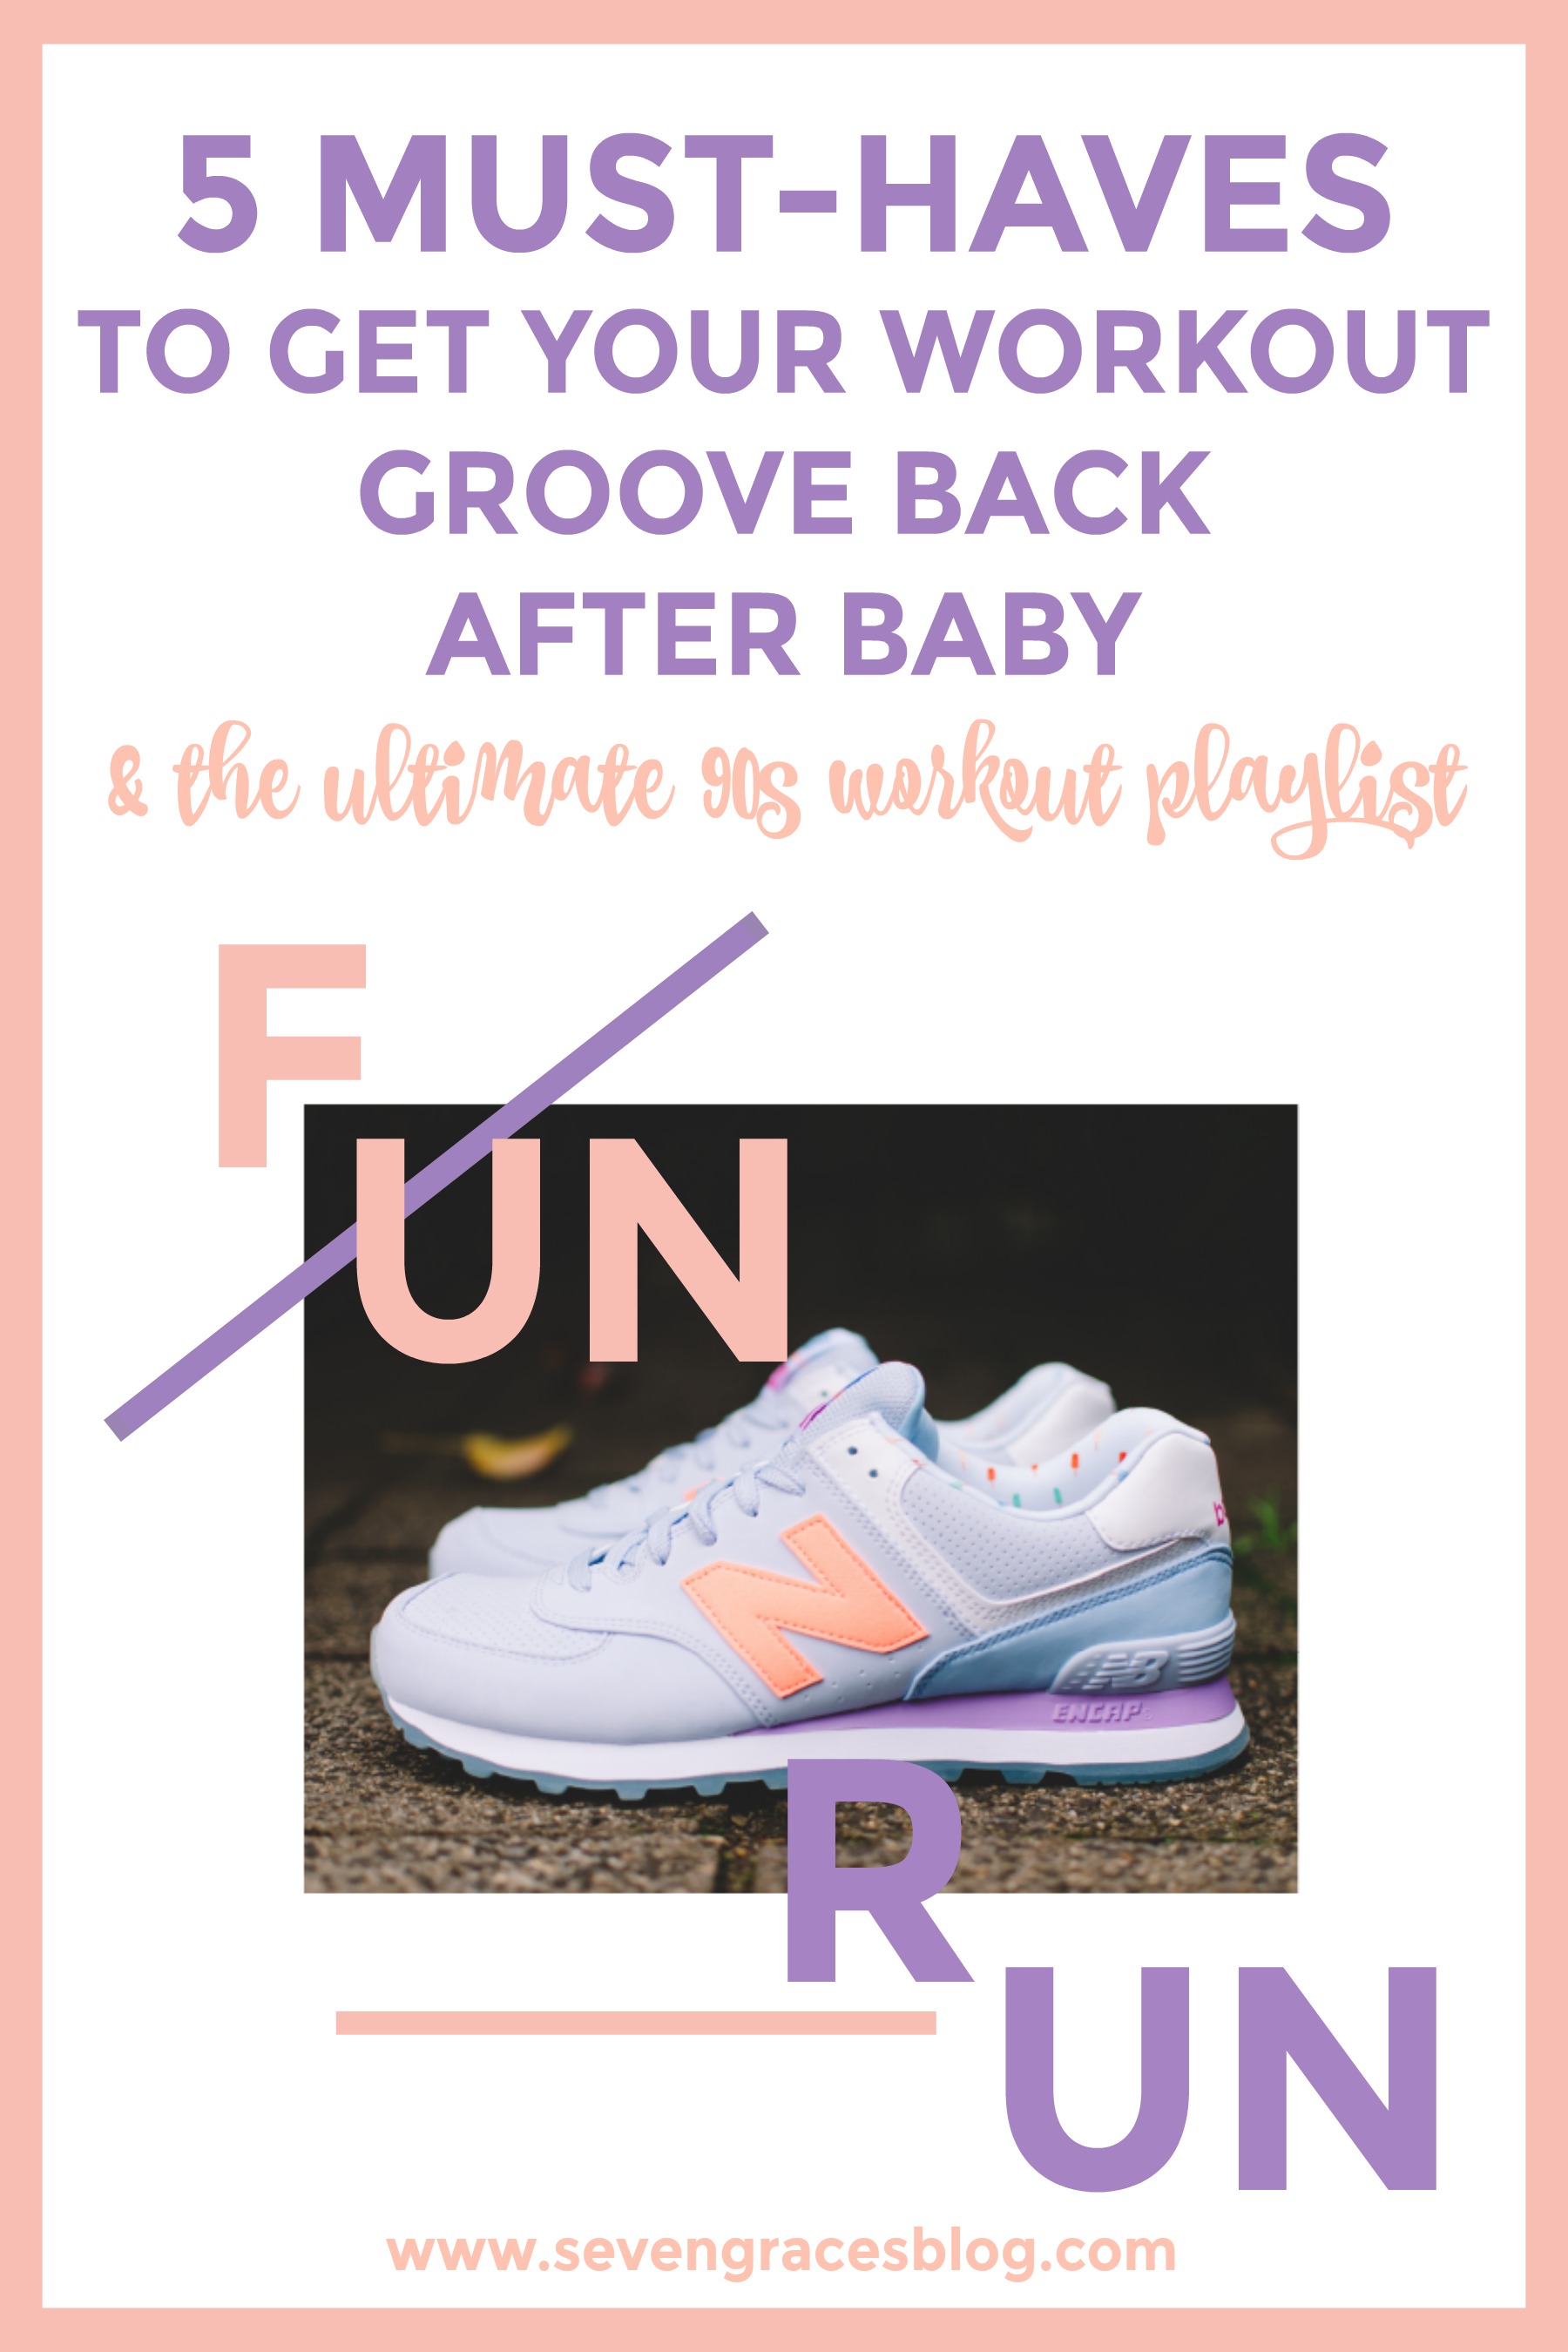 5 Must-Haves to Get Your Workout Groove Back after Baby & the ULTIMATE 90s Workout Playlist. This playlist will definitely motivate you to get back out there.